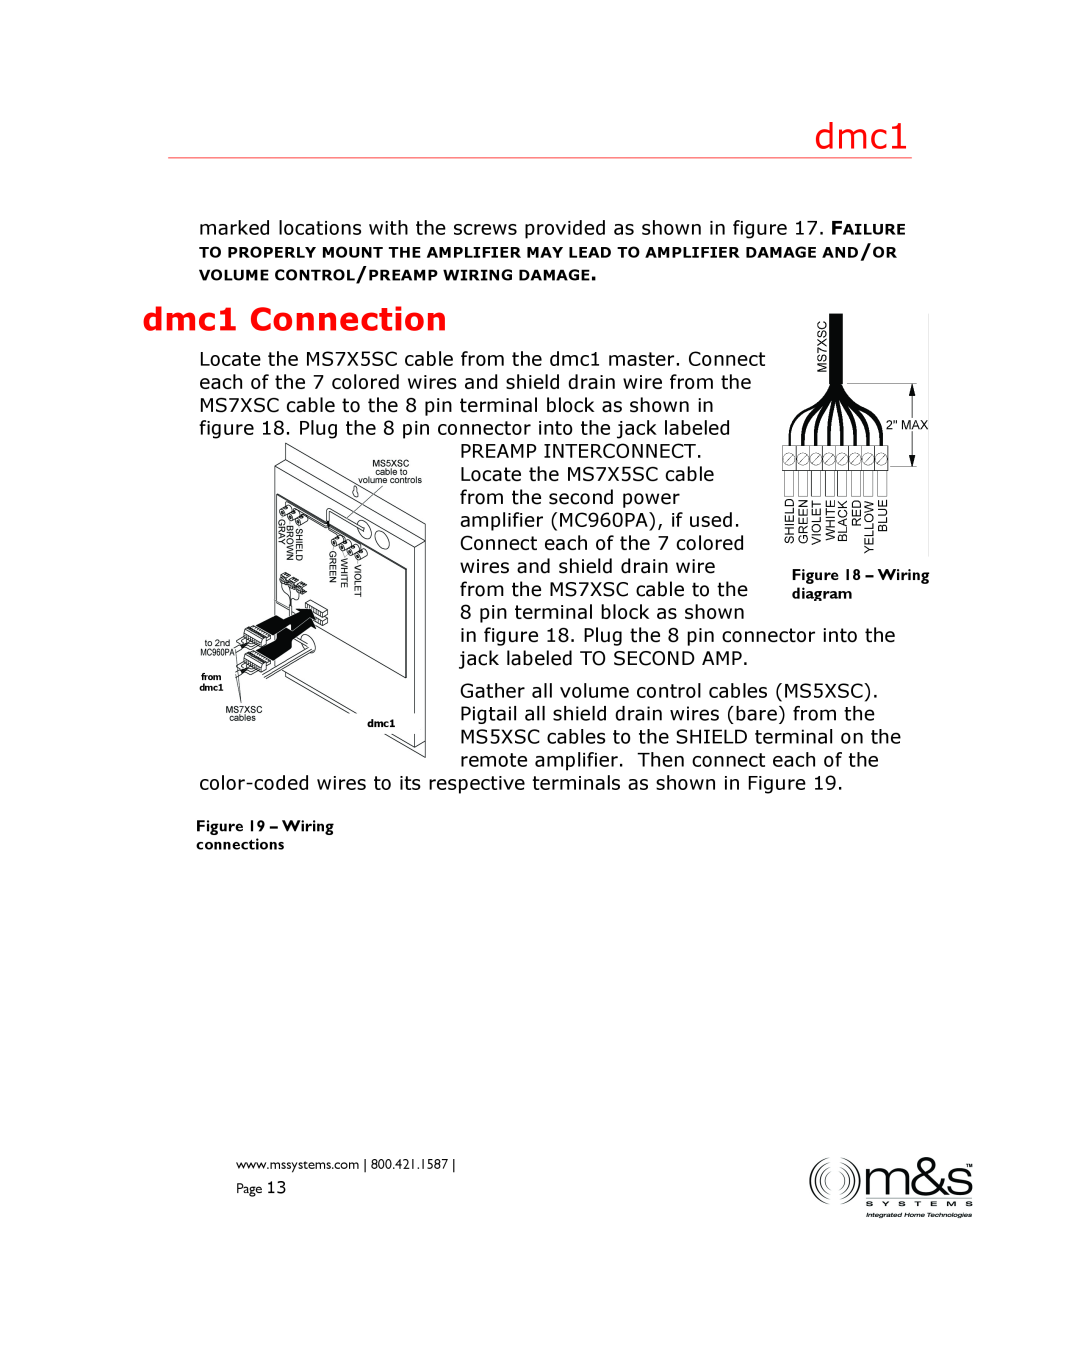 M&S Systems manual dmc1 Connection 